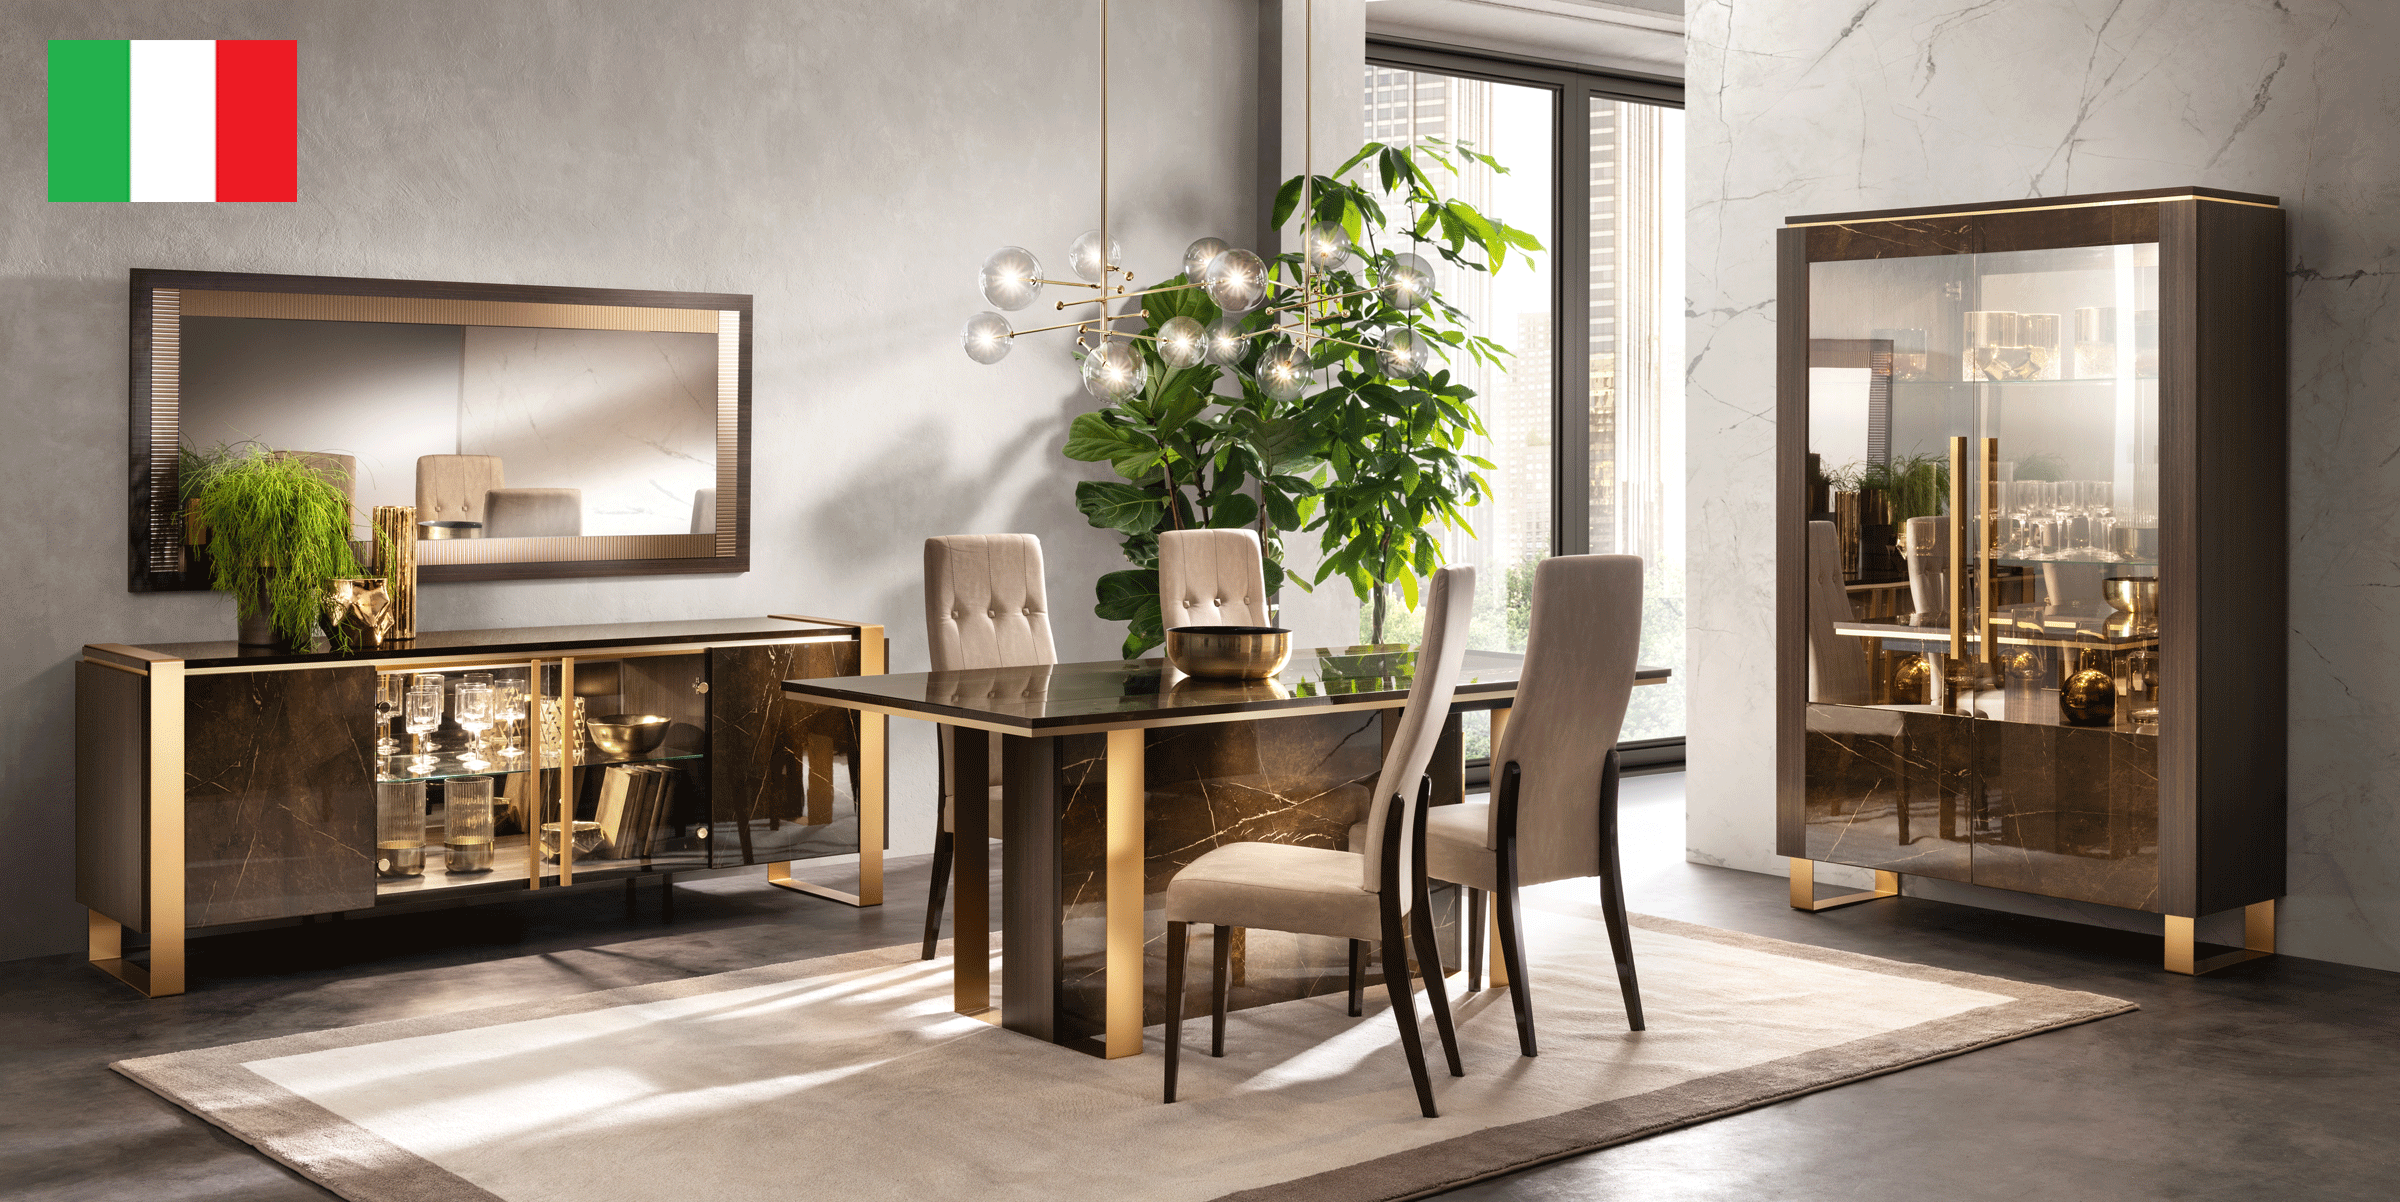 Dining Room Furniture Kitchen Tables and Chairs Sets Essenza Dining by Arredoclassic, Italy